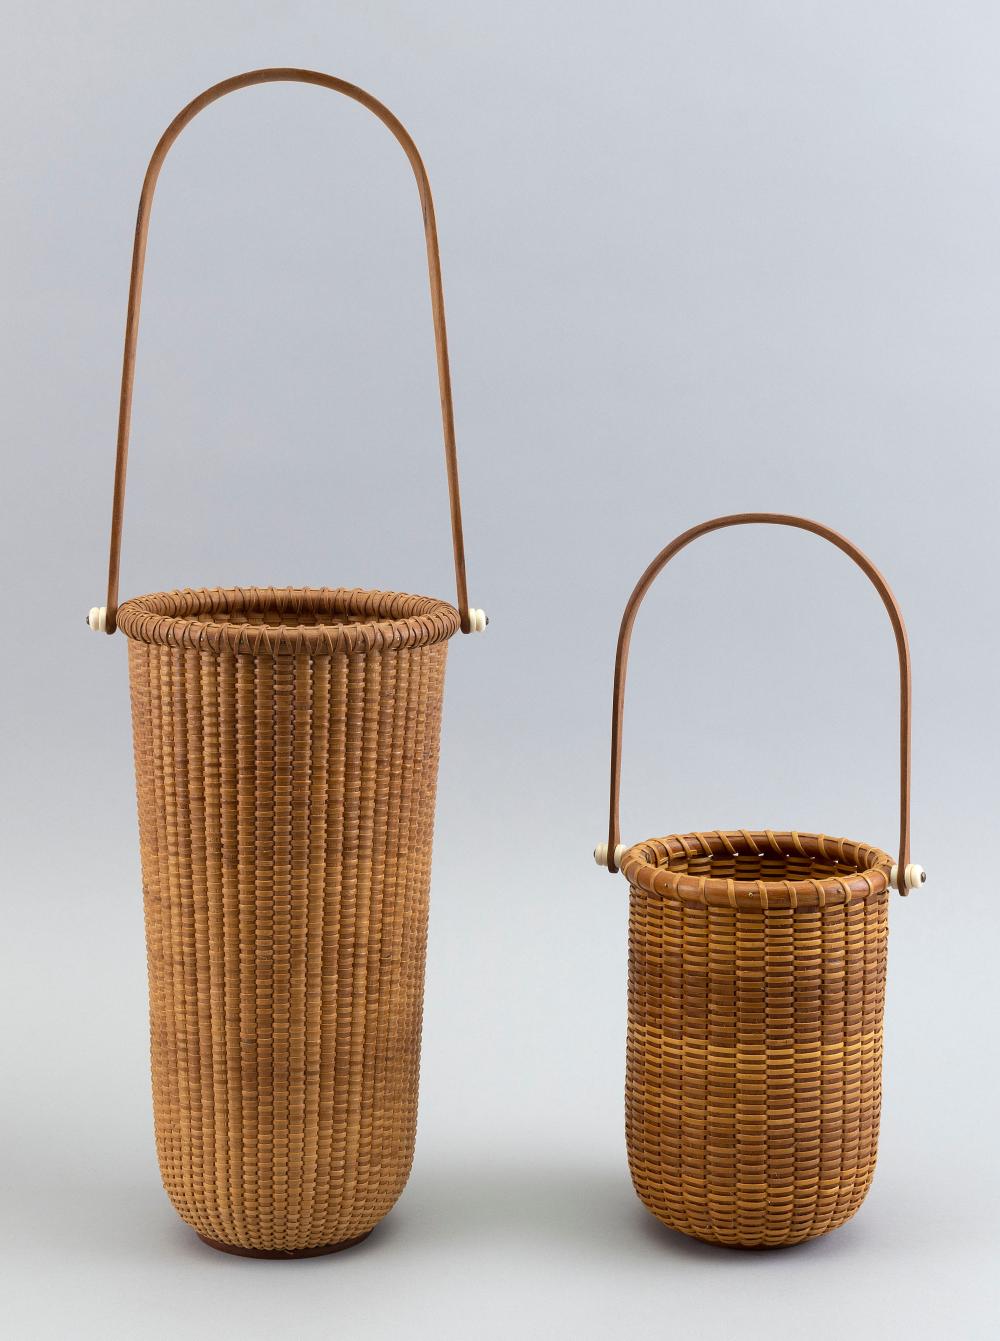 TWO NANTUCKET STYLE BASKETS CONTEMPORARY 2f1c8e